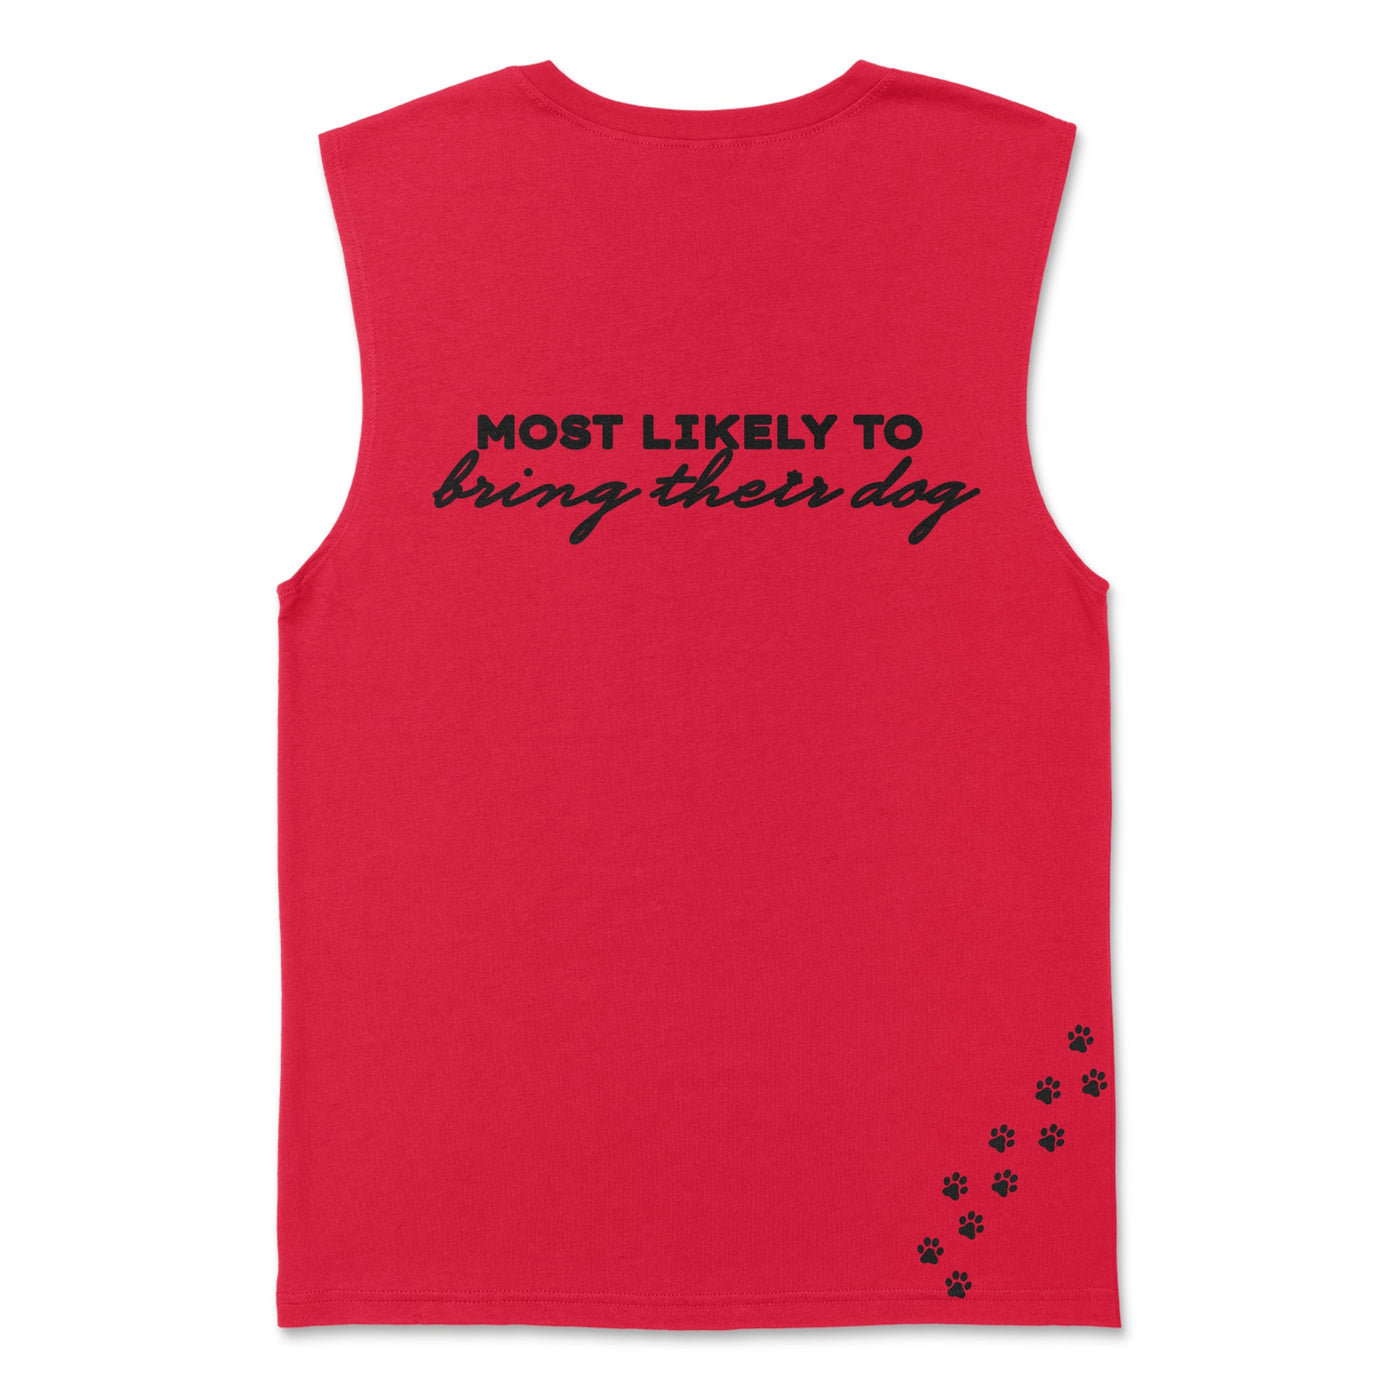 Men's Most Likely Muscle Tank Top Collection - Goats Trail Off-Road Apparel Company